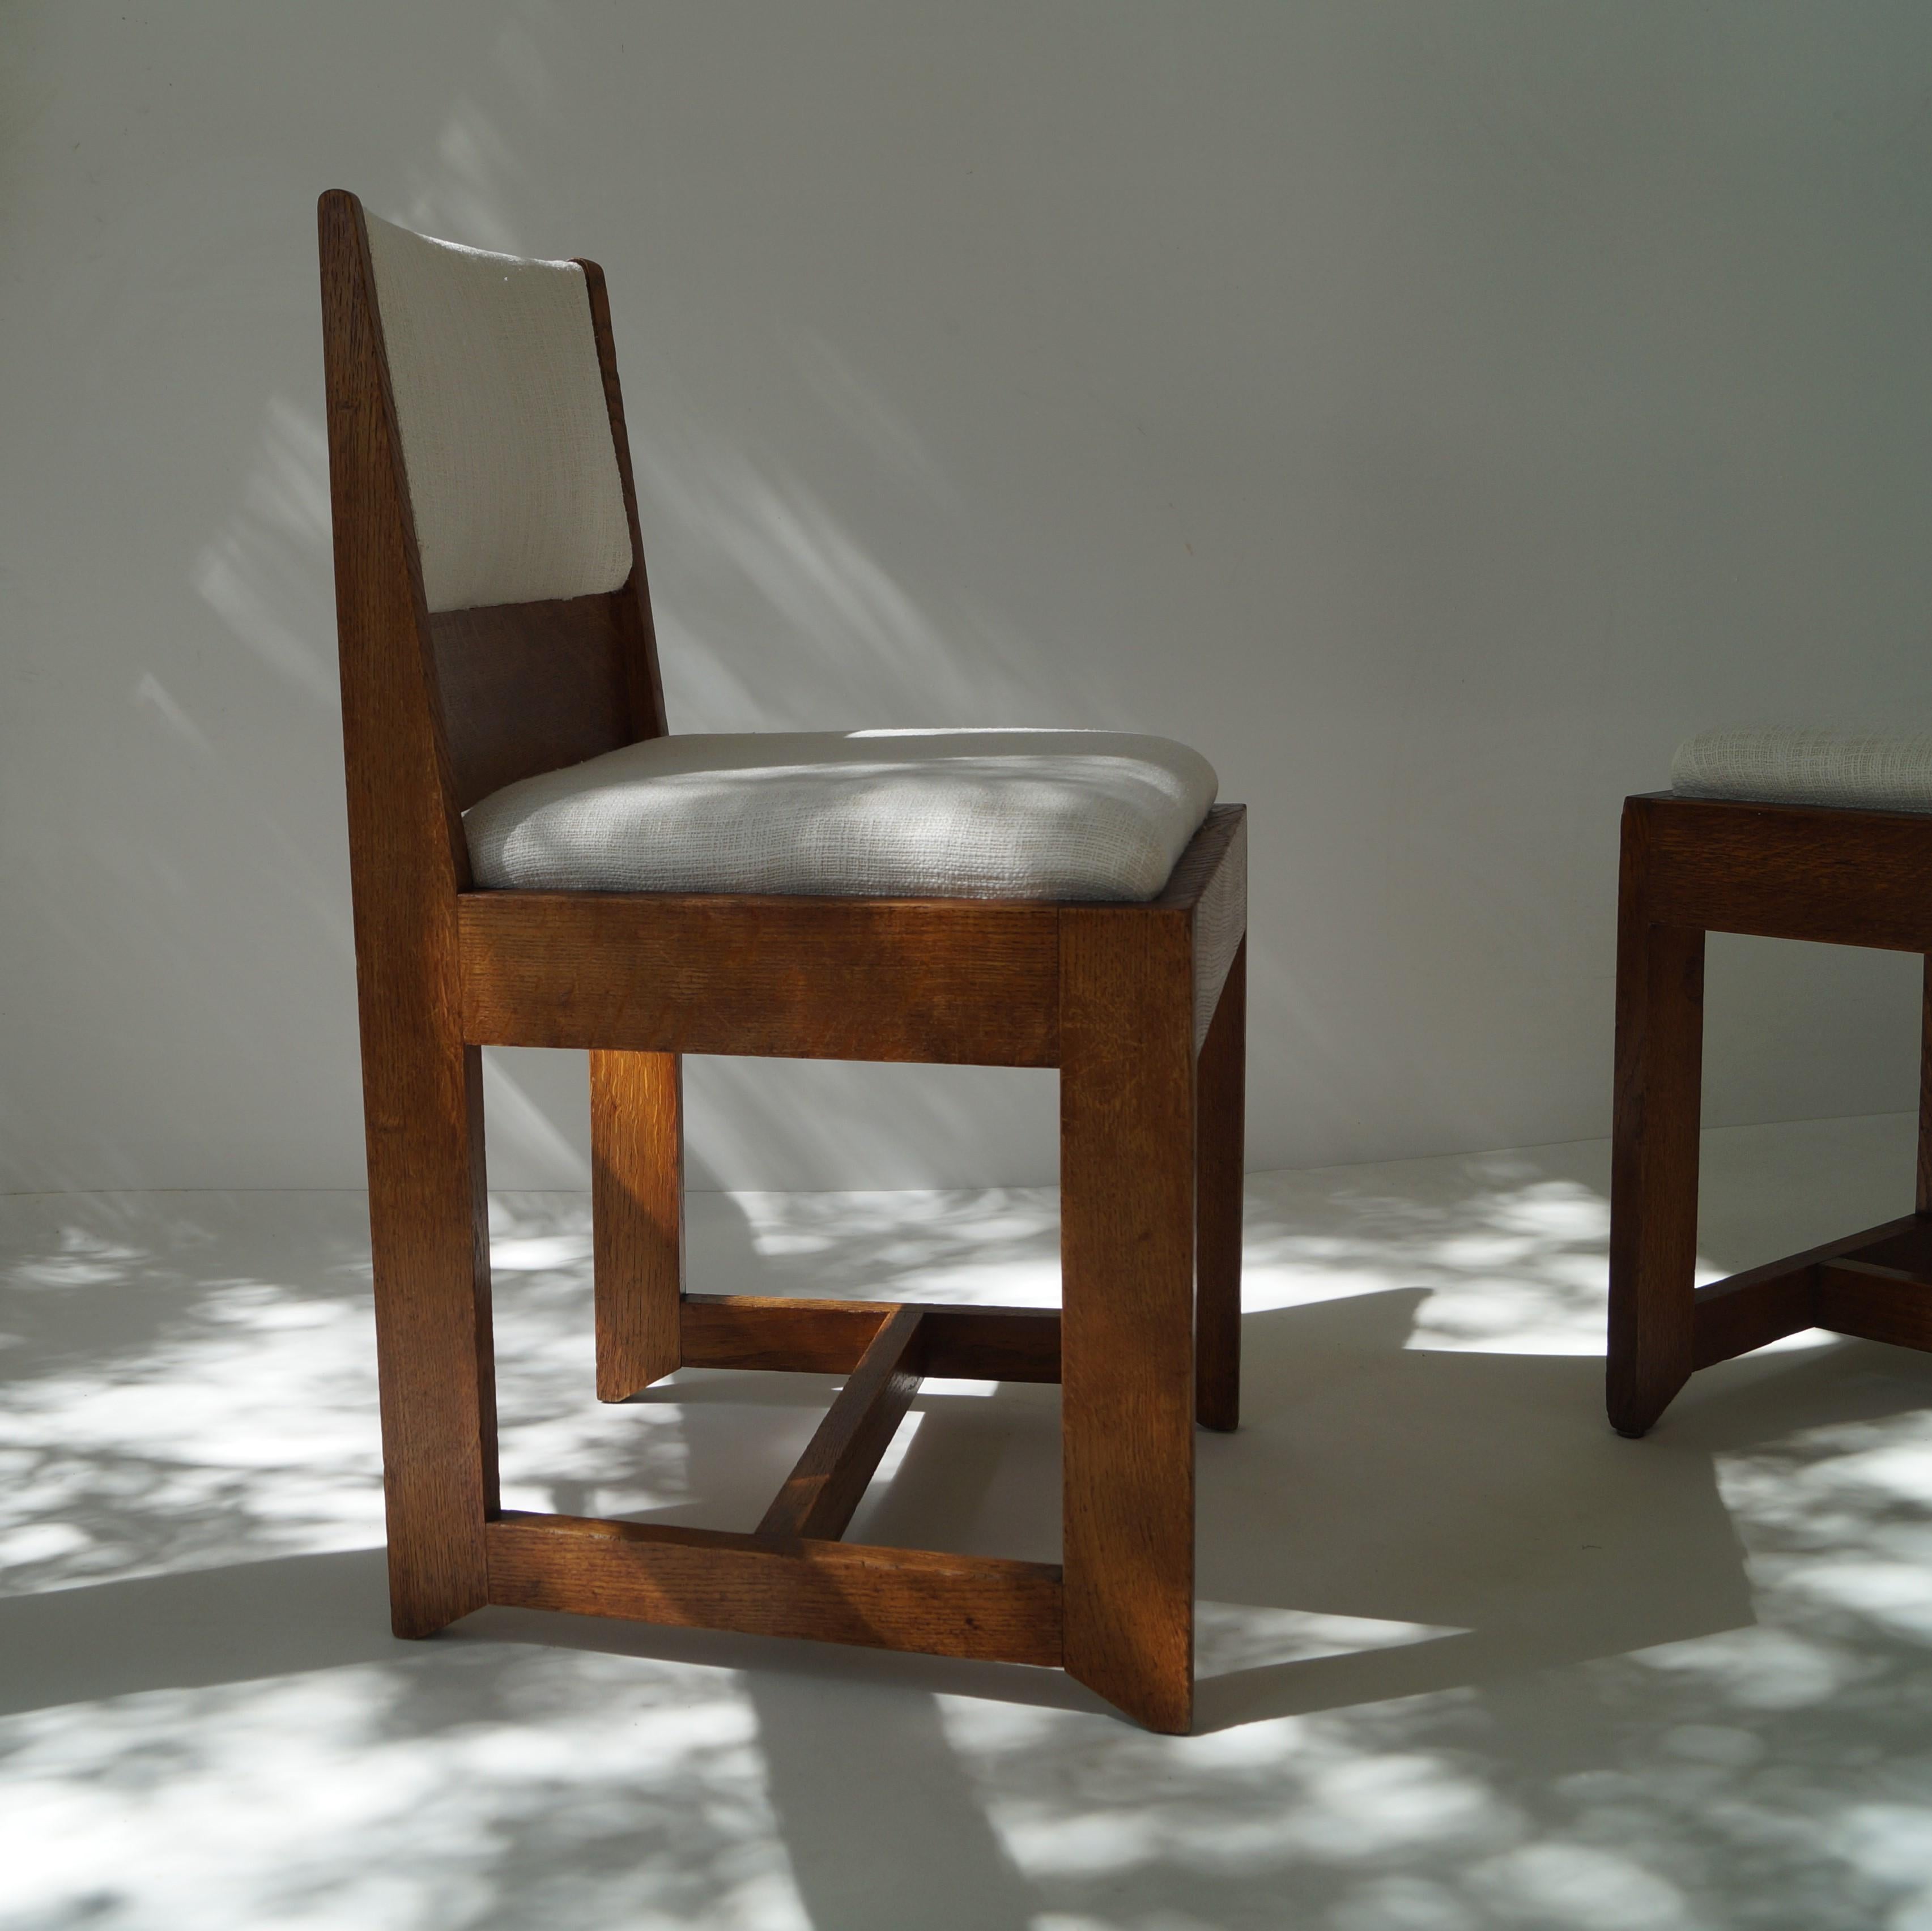 Early 20th Century Dutch Art Deco Modernist set of chairs by H. Wouda for Pander, 1924 For Sale